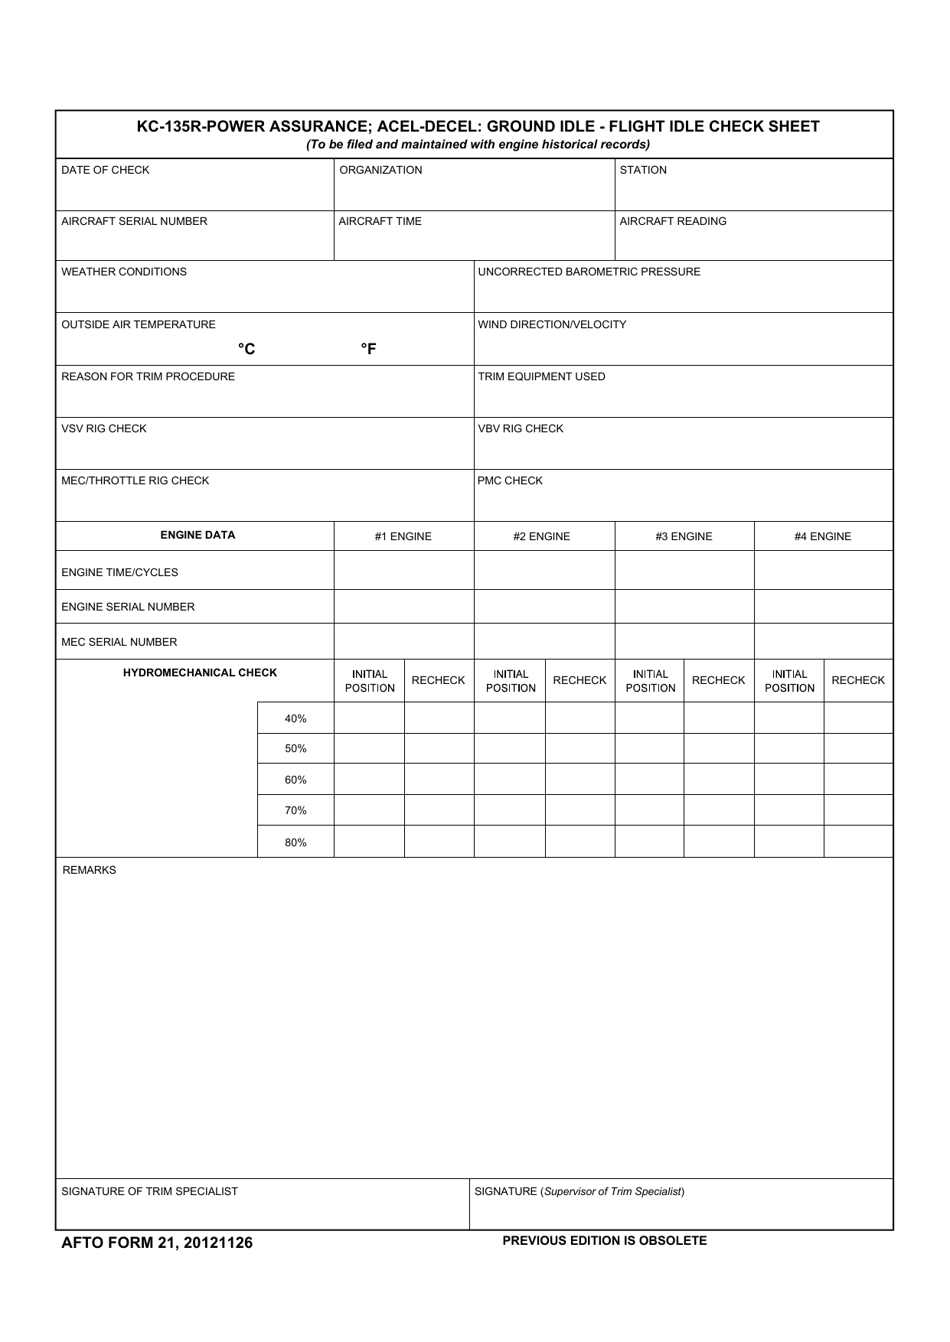 AFTO Form 21 Kc-135r-Power Assurance; Acel-Decel; Ground Idle-Flight Idle Check Sheet, Page 1